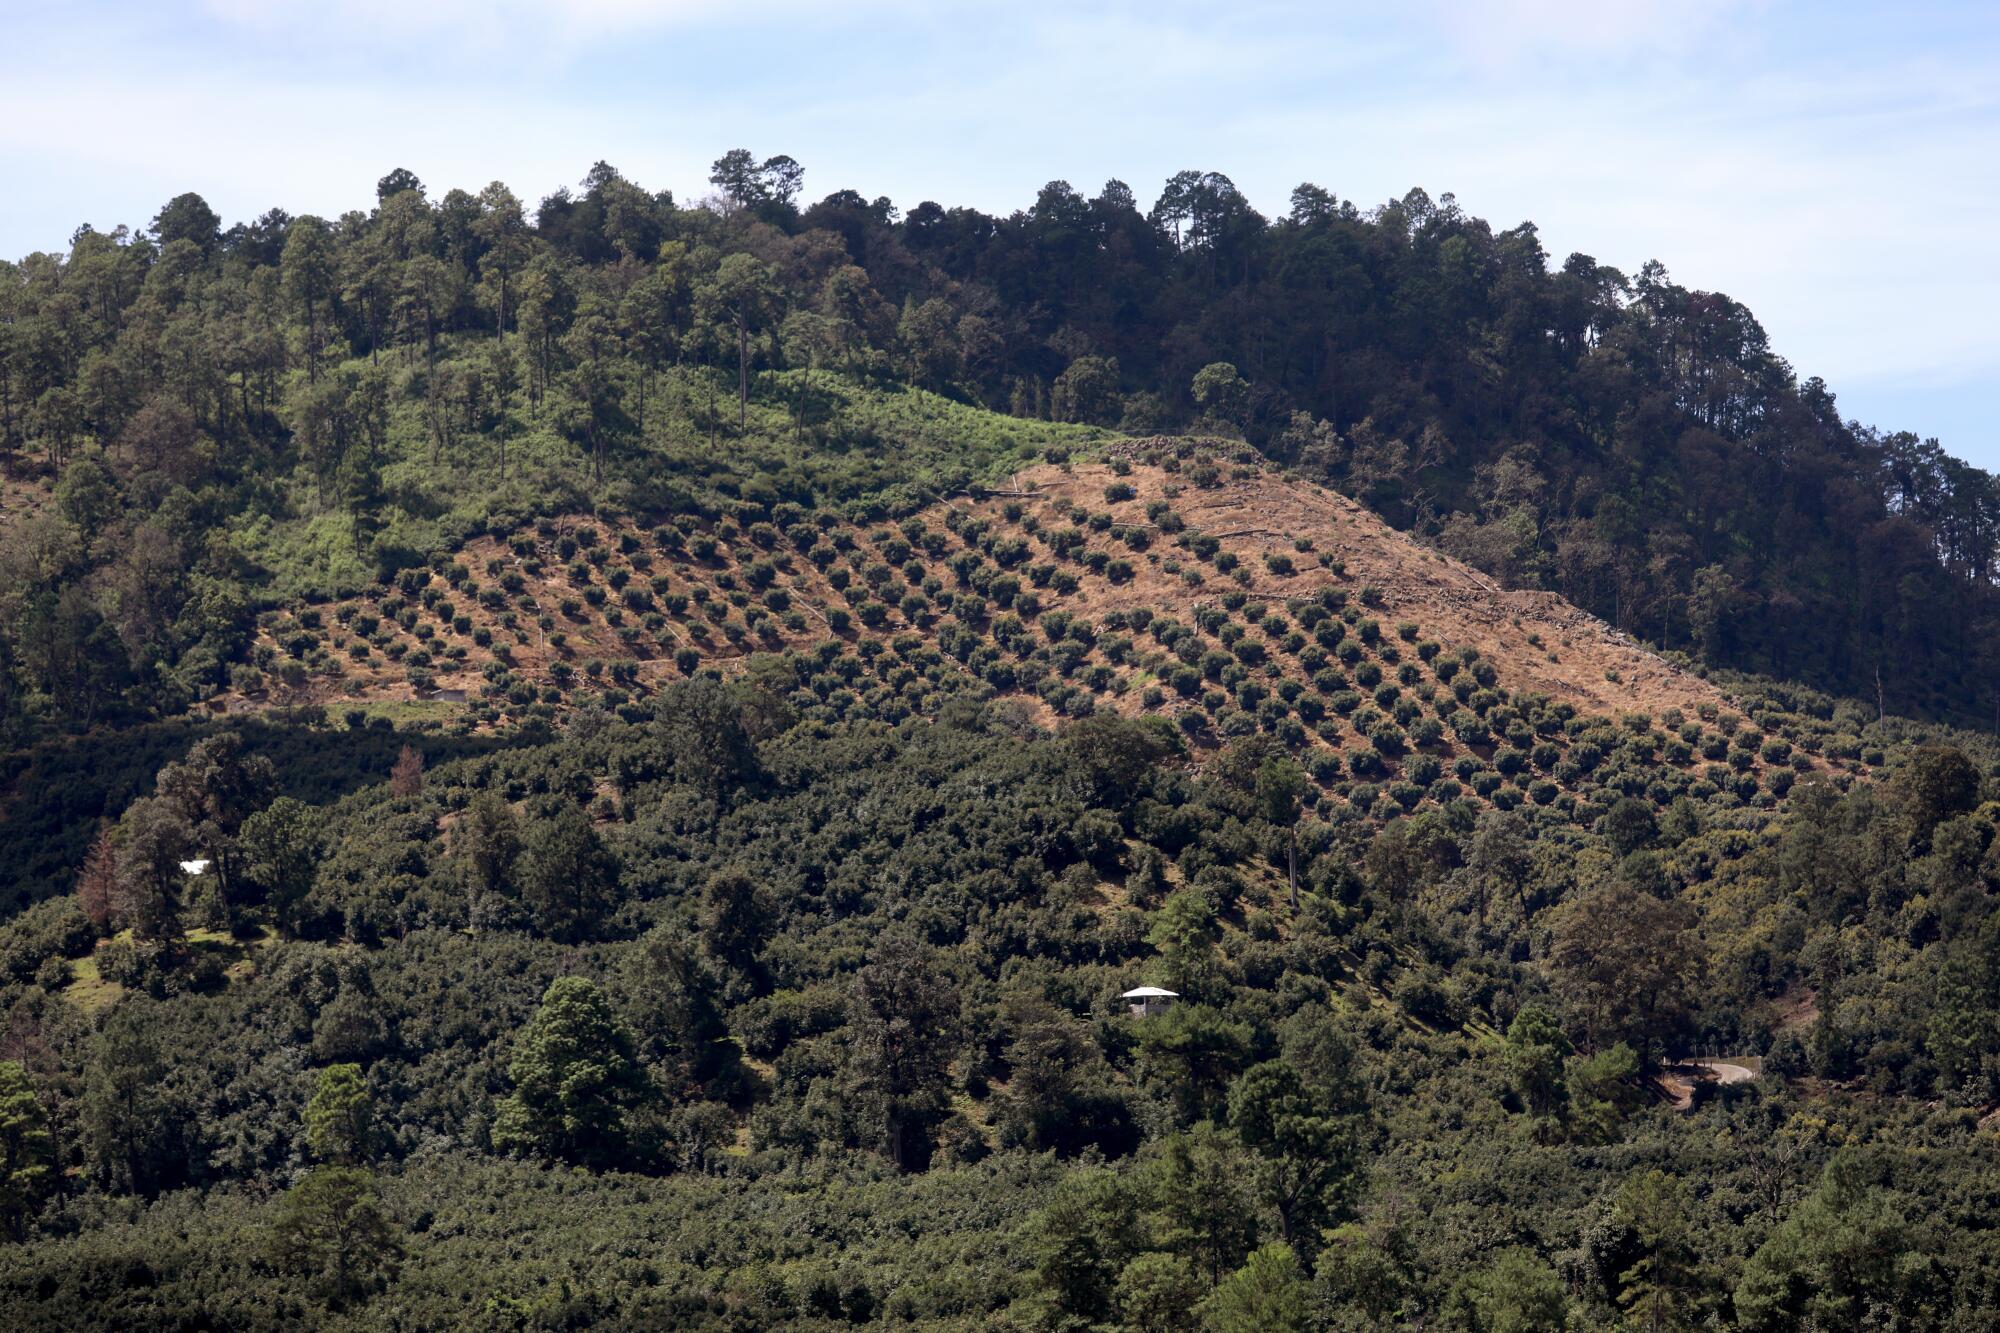 Avocado groves carved into the hillside outside the city of Uruapan, where cartels have evolved beyond drug trafficking and now prey on the avocado trade.